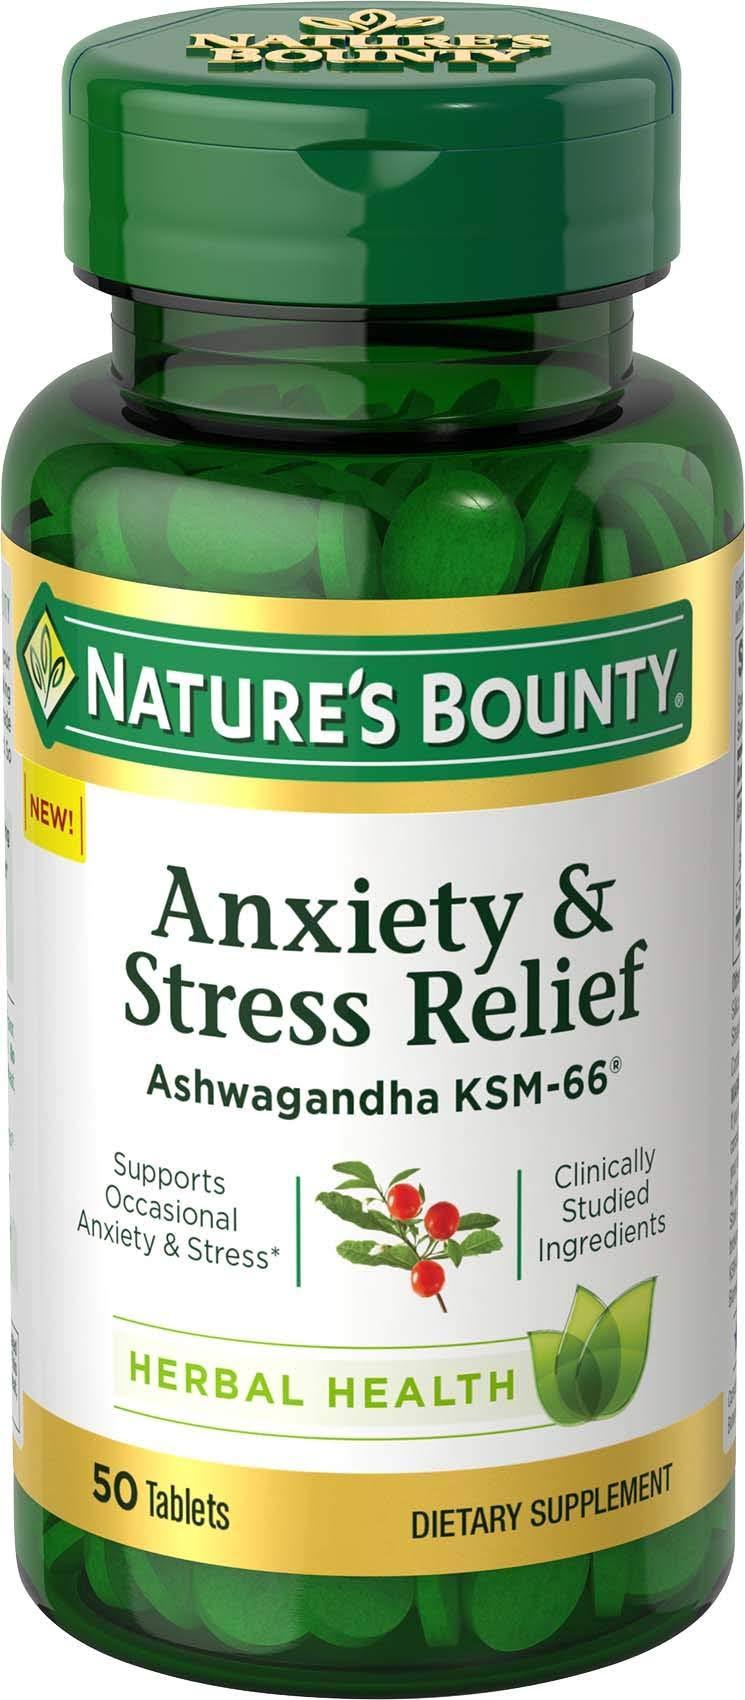 Nature's Bounty Anxiety & Stress Relief, Tablets - 50 tablets